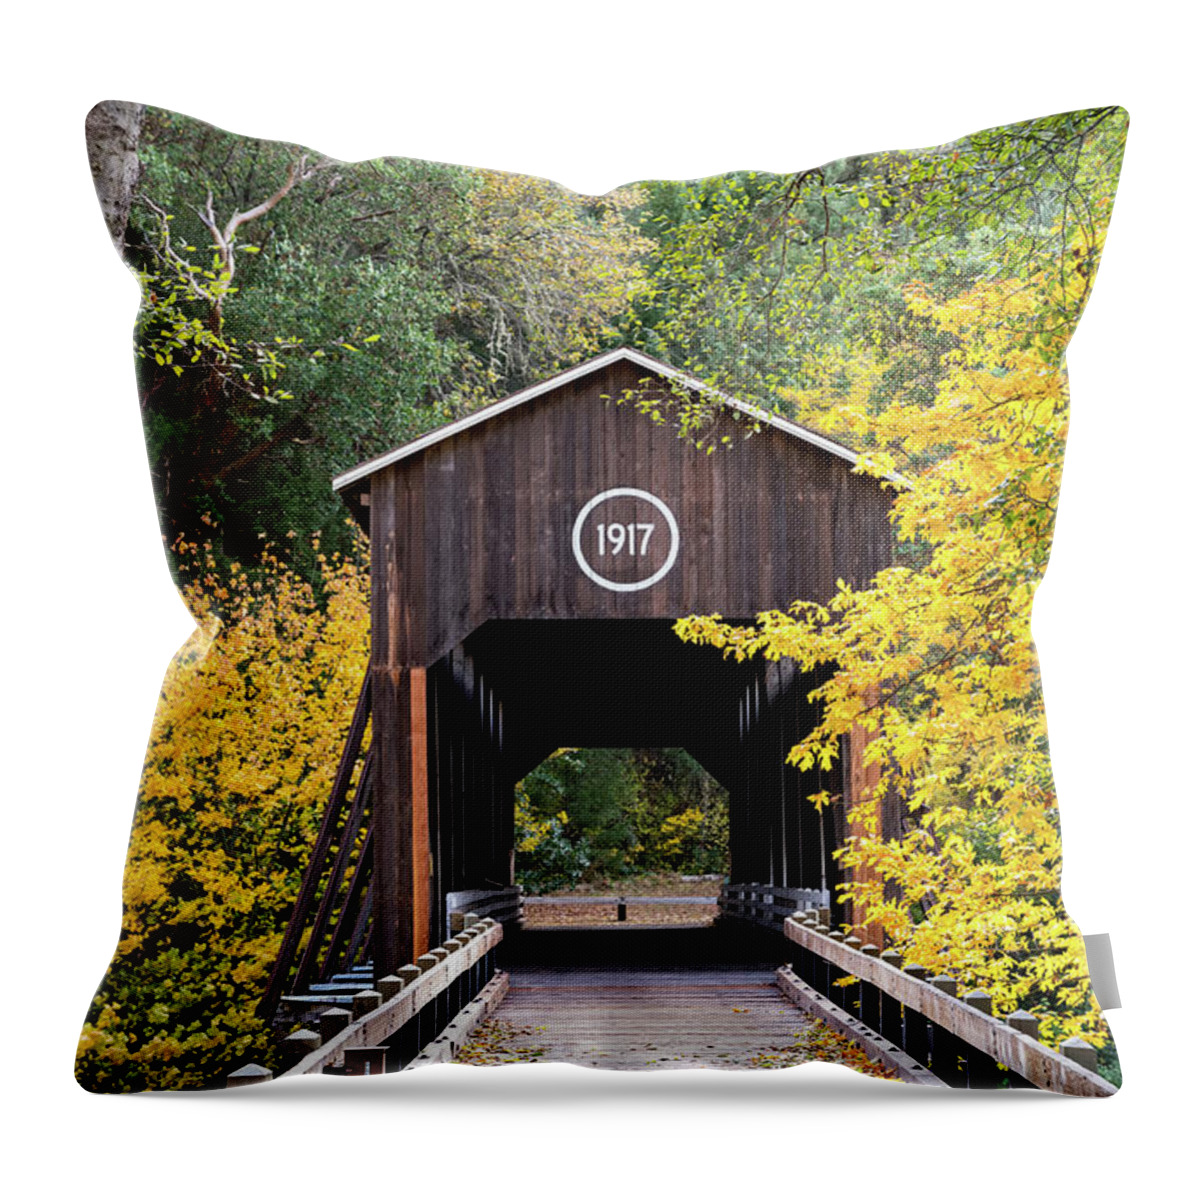 Applegate River Valley Throw Pillow featuring the photograph The Mckee Bridge by Steven Clark